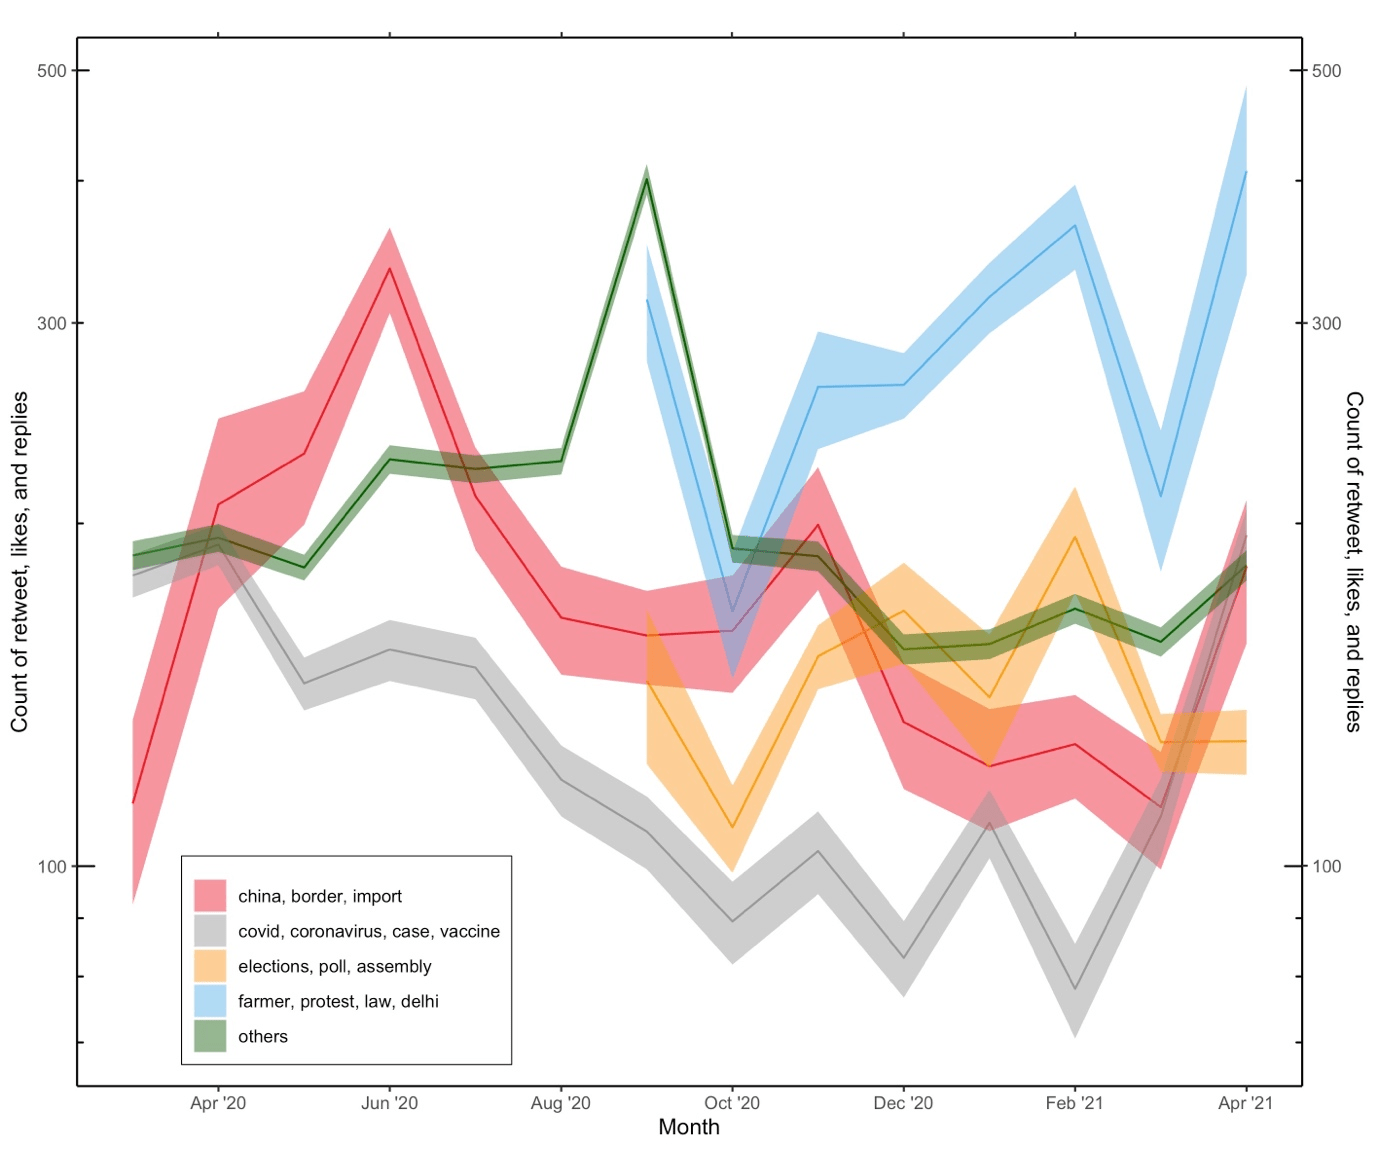 Figure 4 Count of Twitter retweets, likes, and replies over time across topics